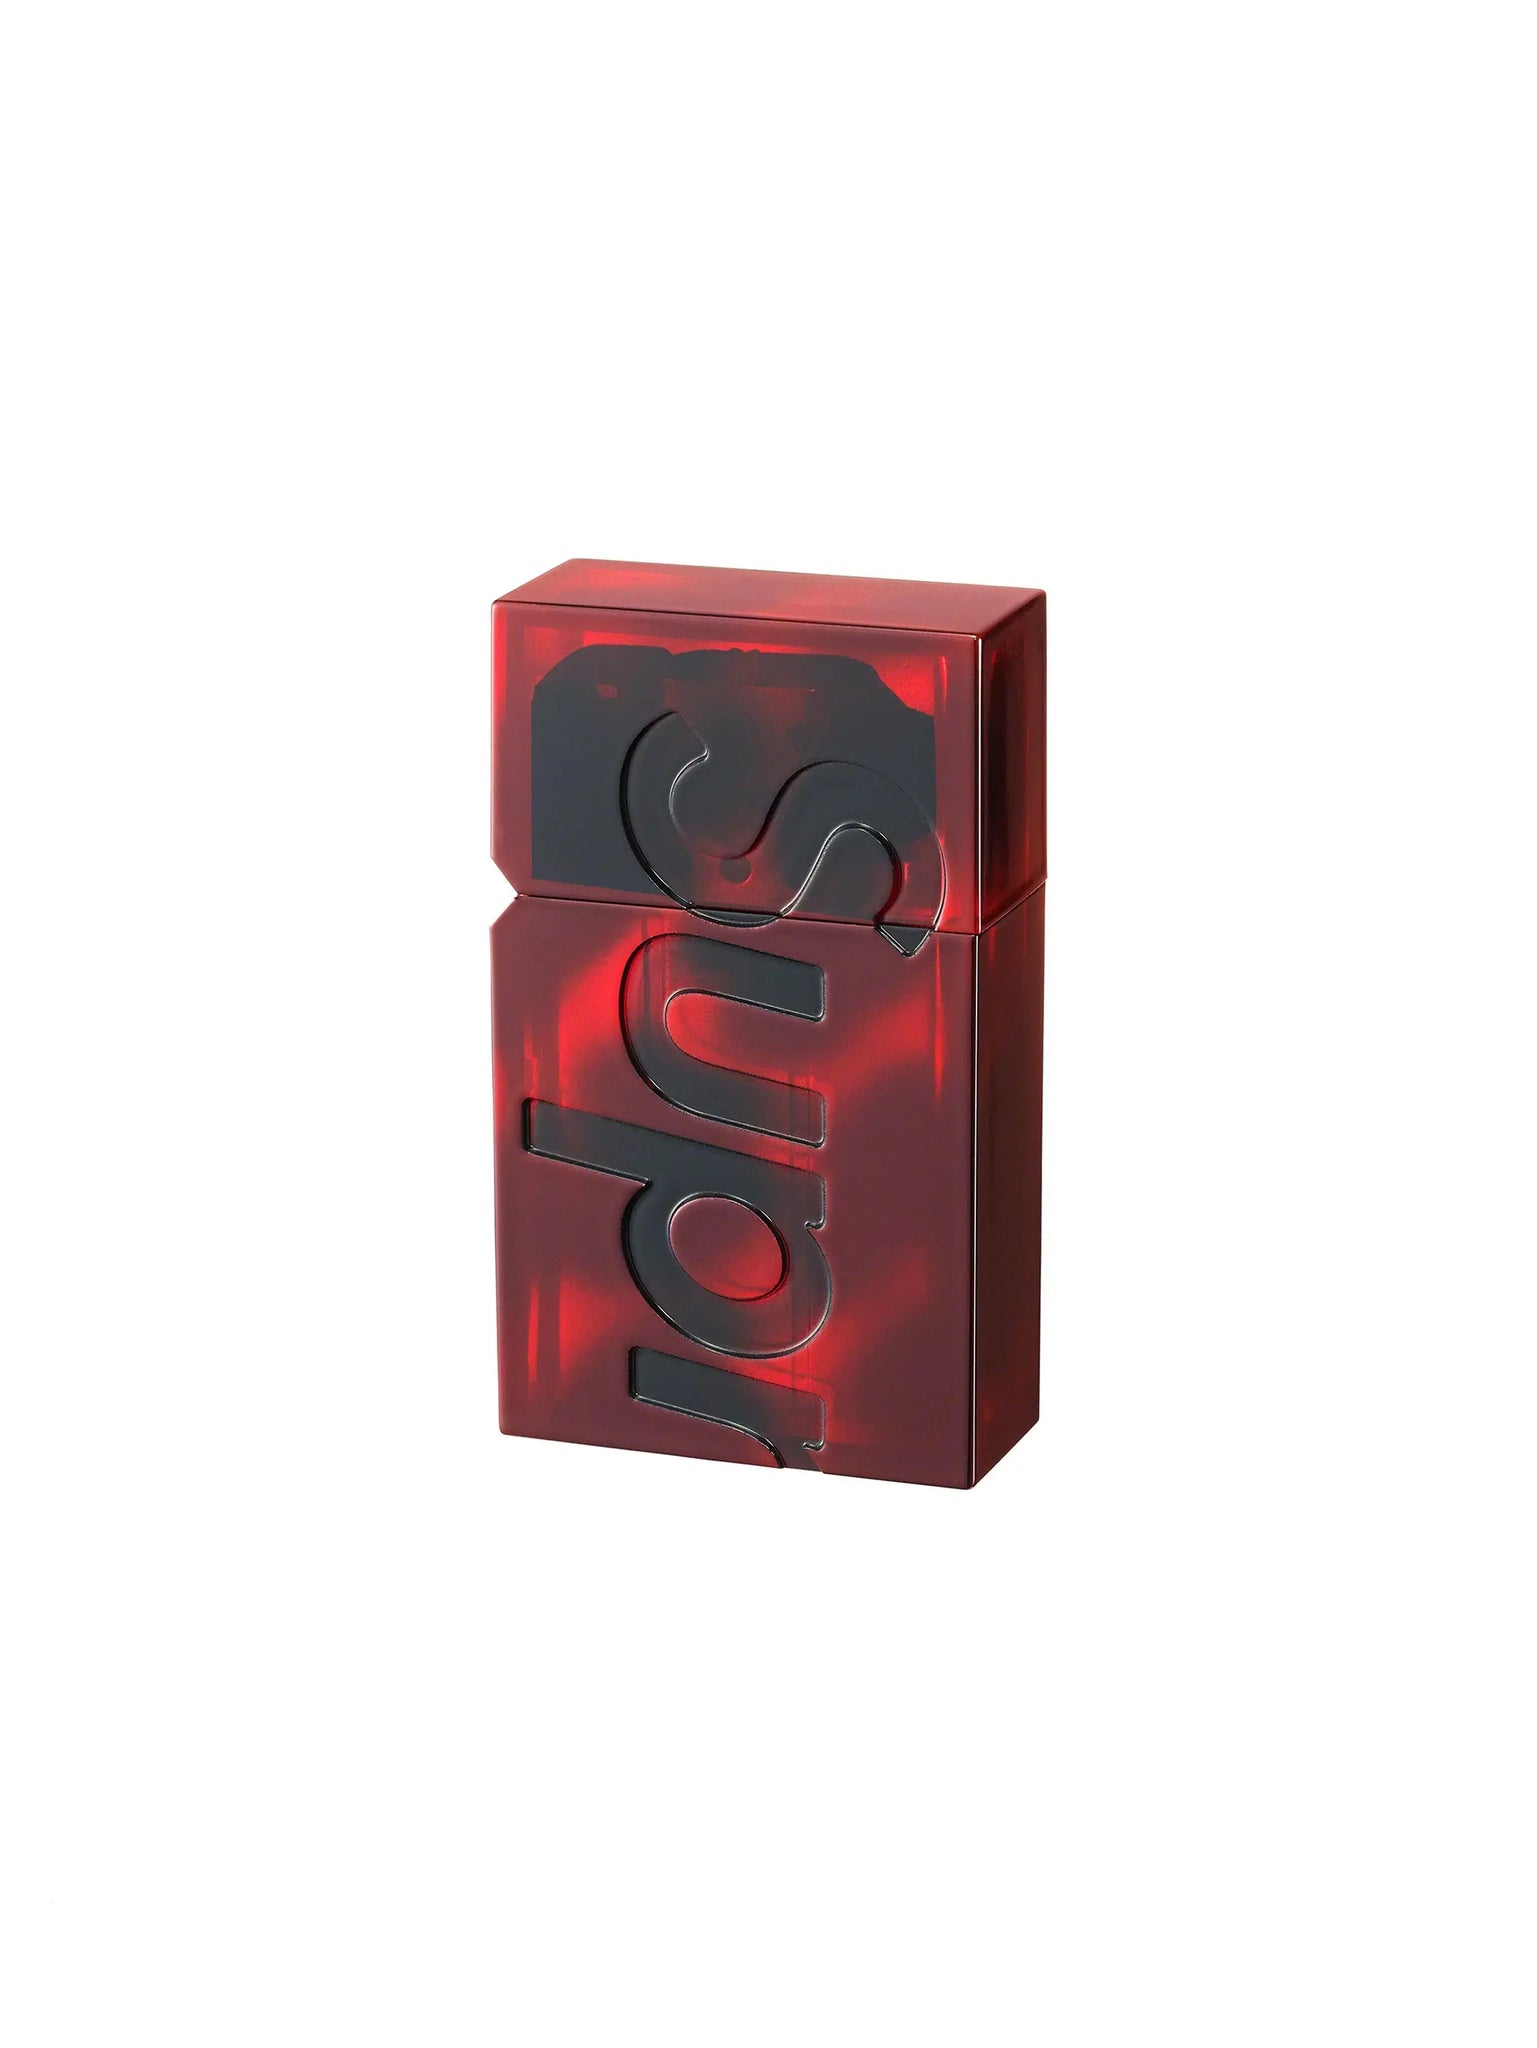 Supreme Tsubota Pearl Hard Edge Lighter (FW21) Red in Auckland, New Zealand - Shop name